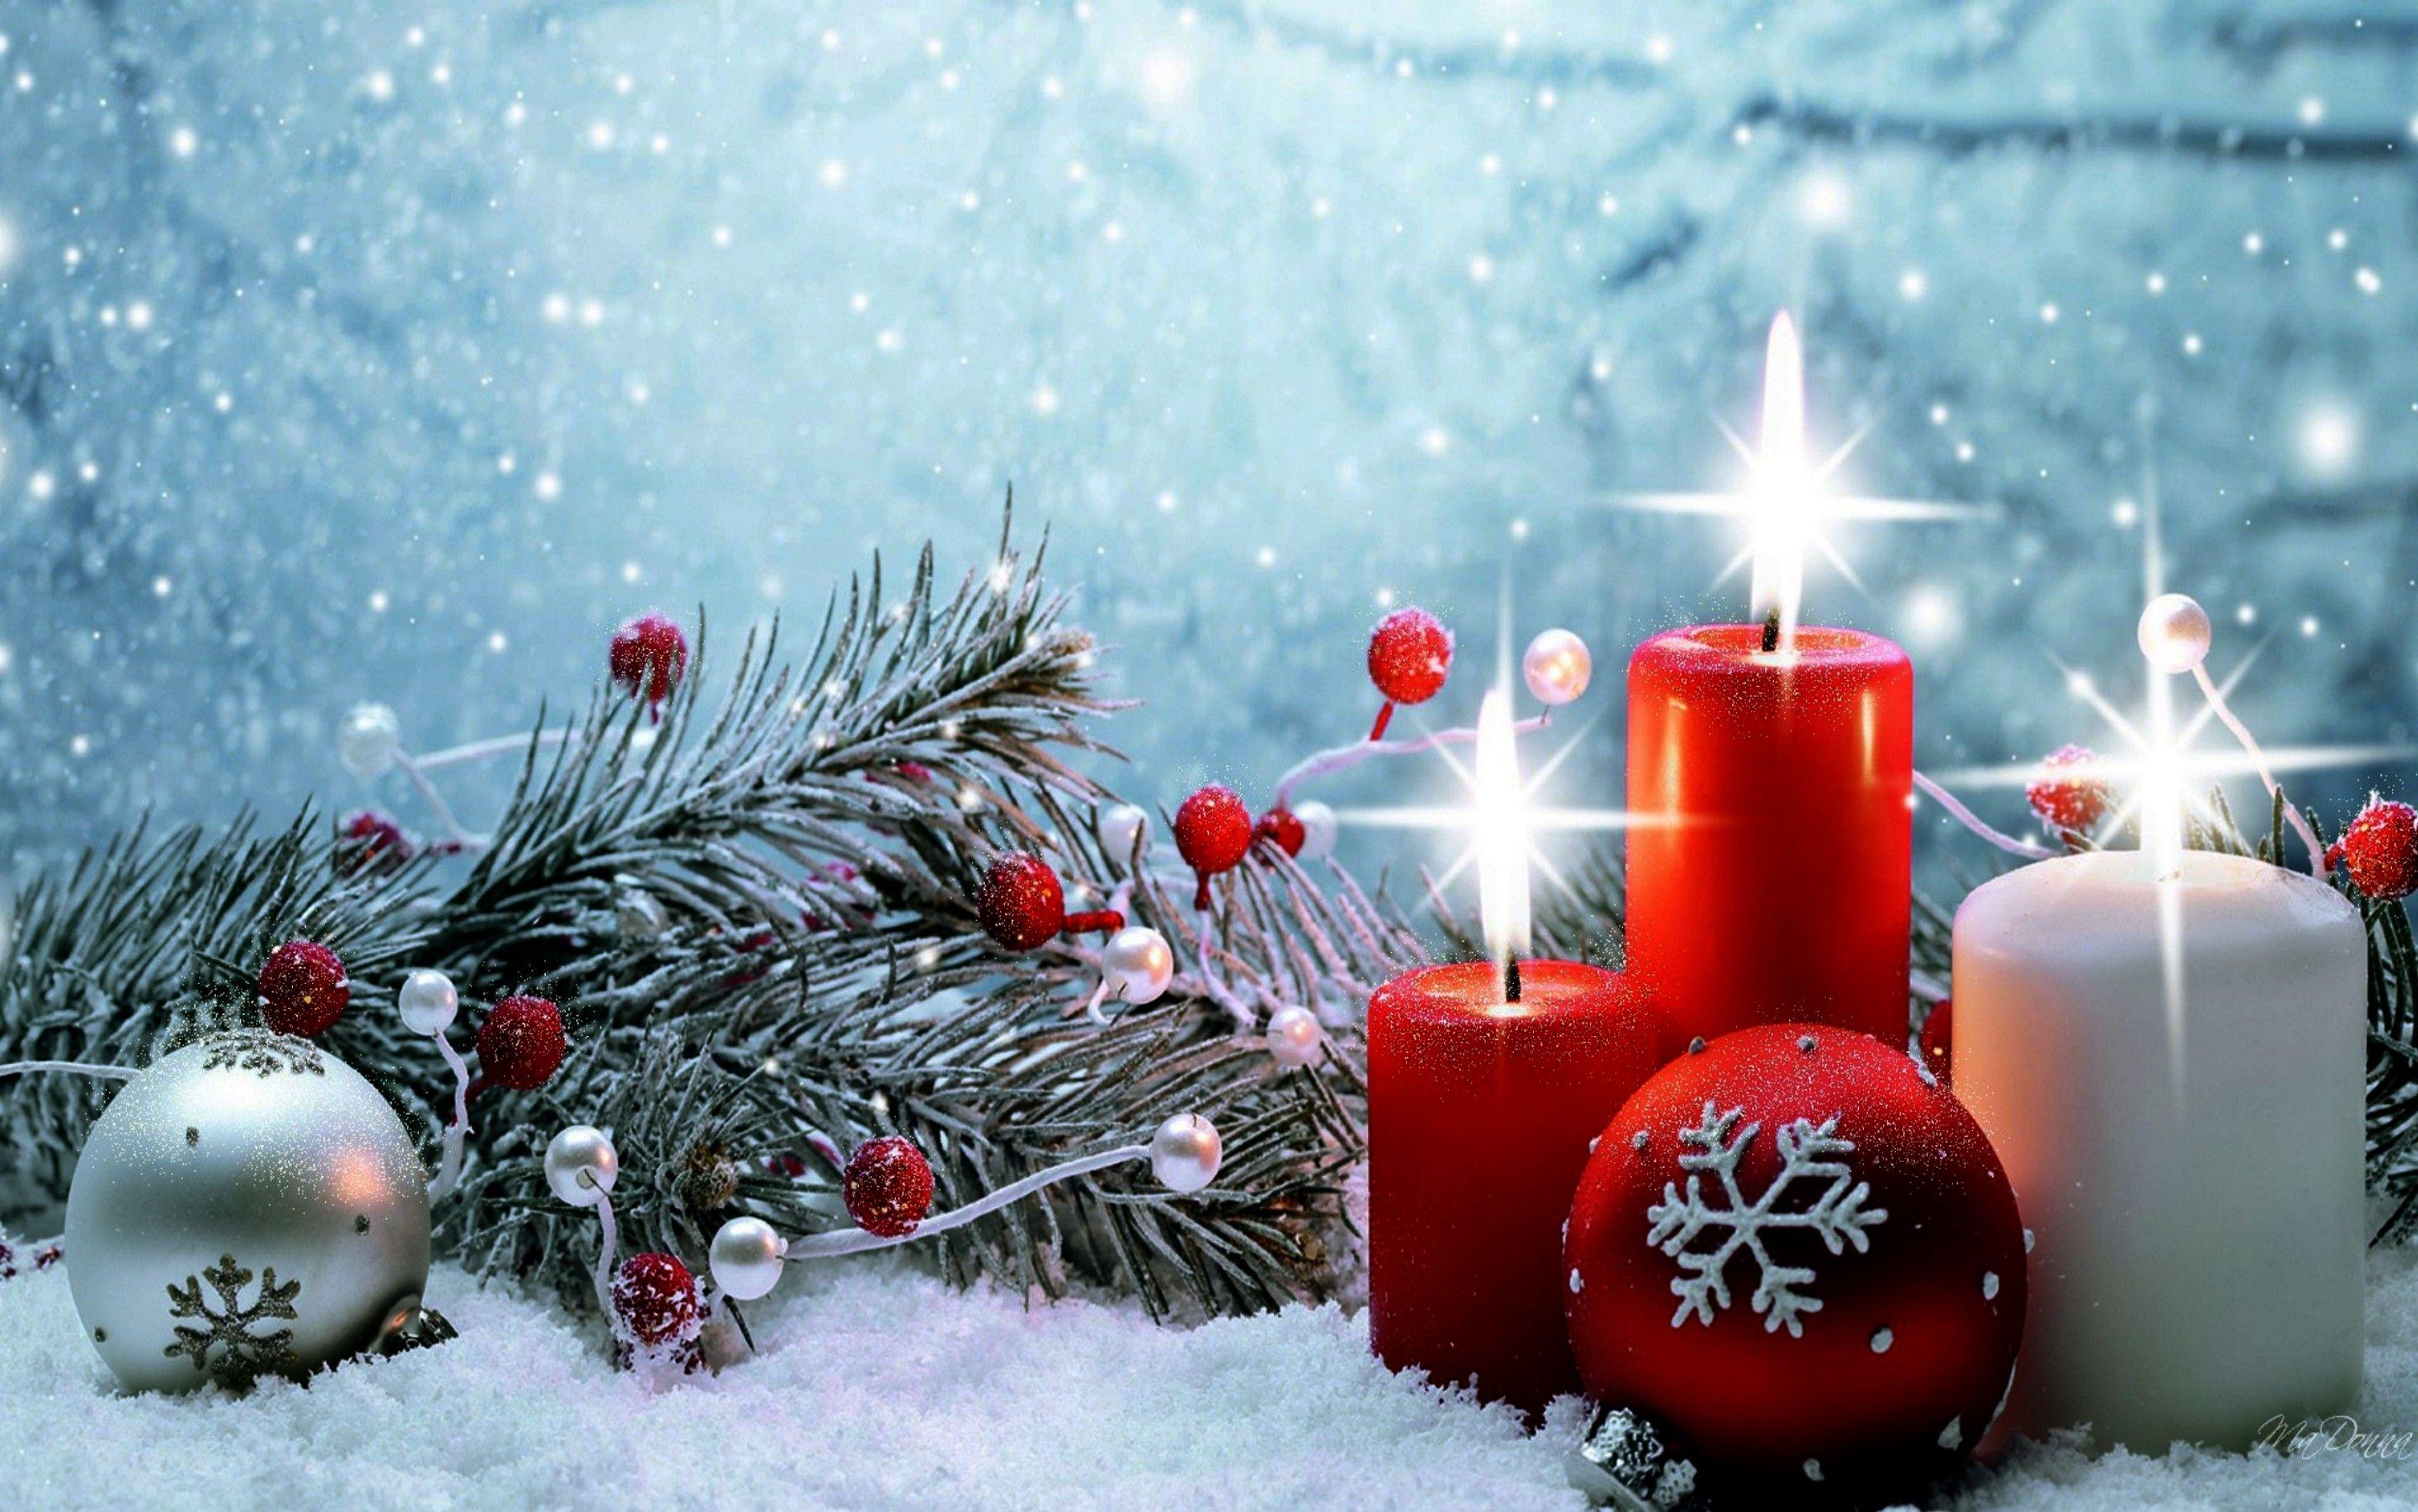 Winter Christmas Pictures Wallpapers - Wallpaper Cave